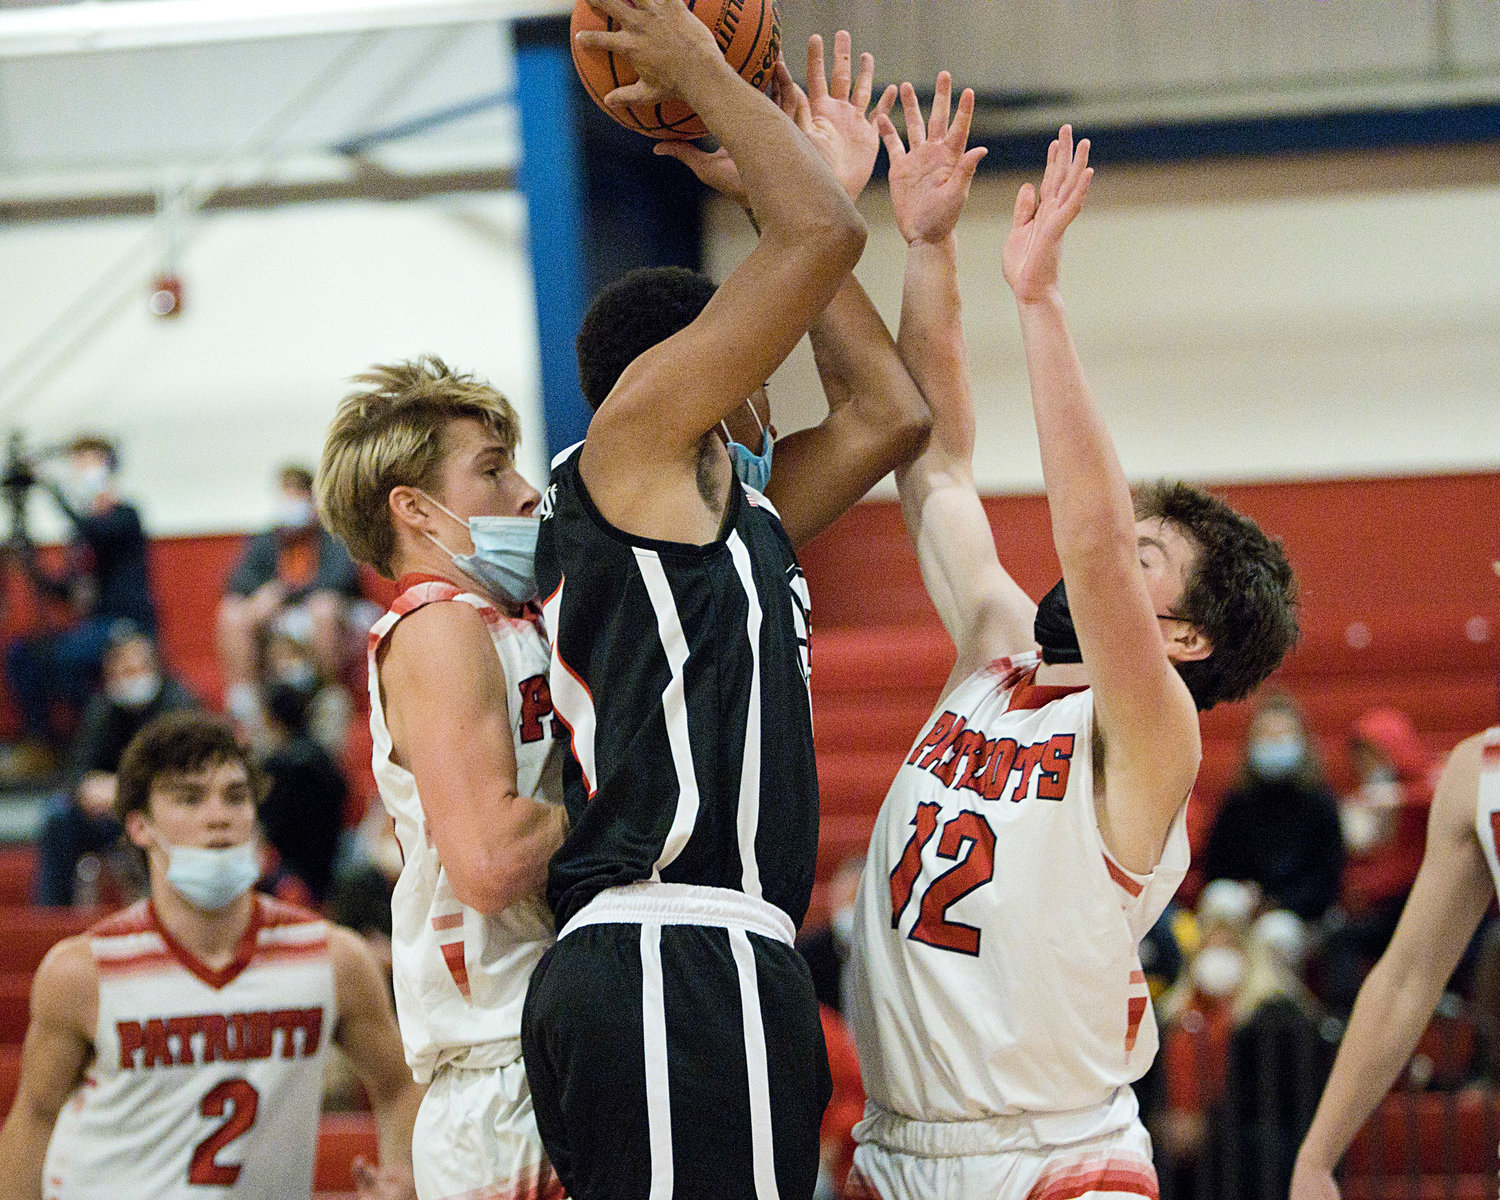 Portsmouth’s Jeff Brady (left) and Luke Brennan attempt to prevent a Mt. Pleasant opponent from making a shot.